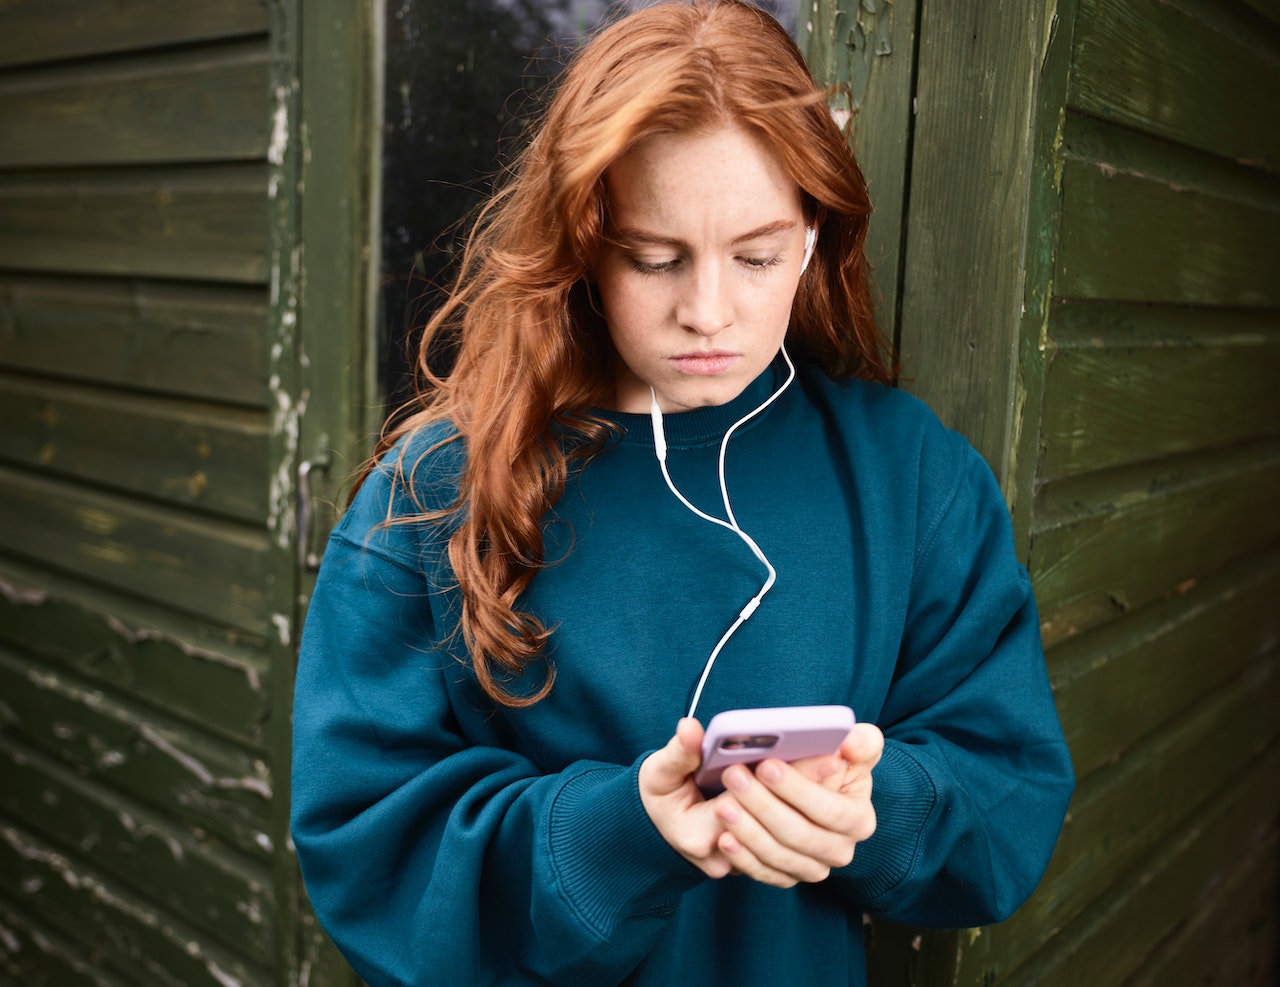 Redhead Woman Leaning against Wall Listening to Music from Phone